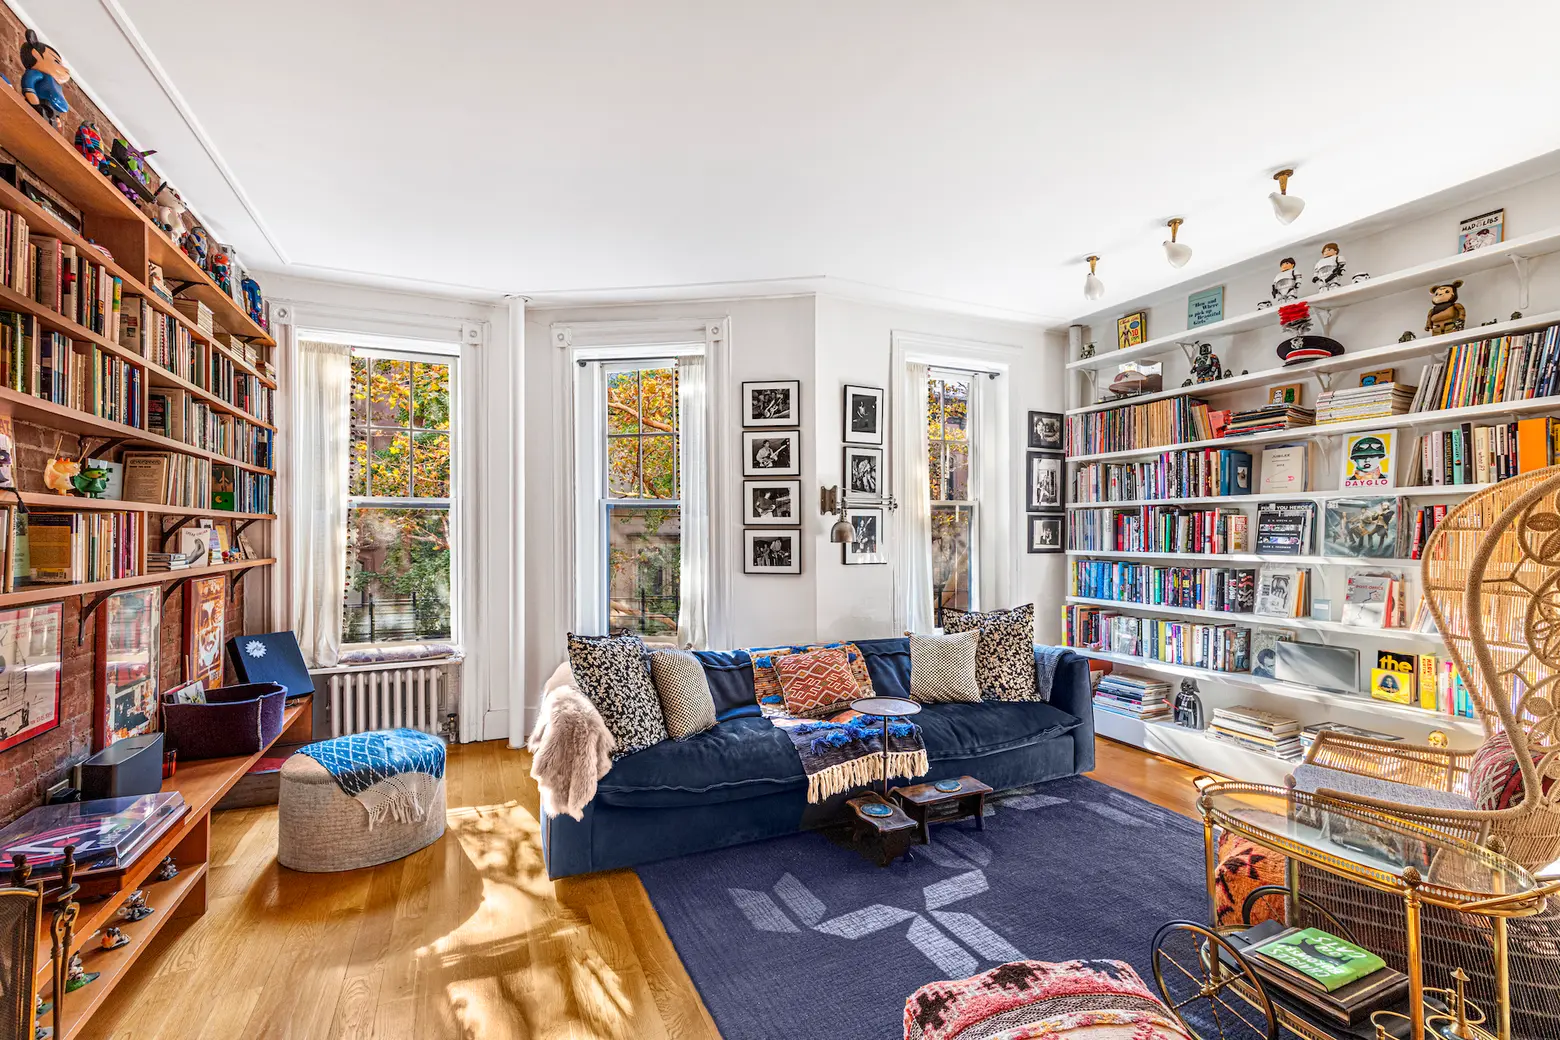 This $3M West Village co-op has old-world charm at a 21st-century price